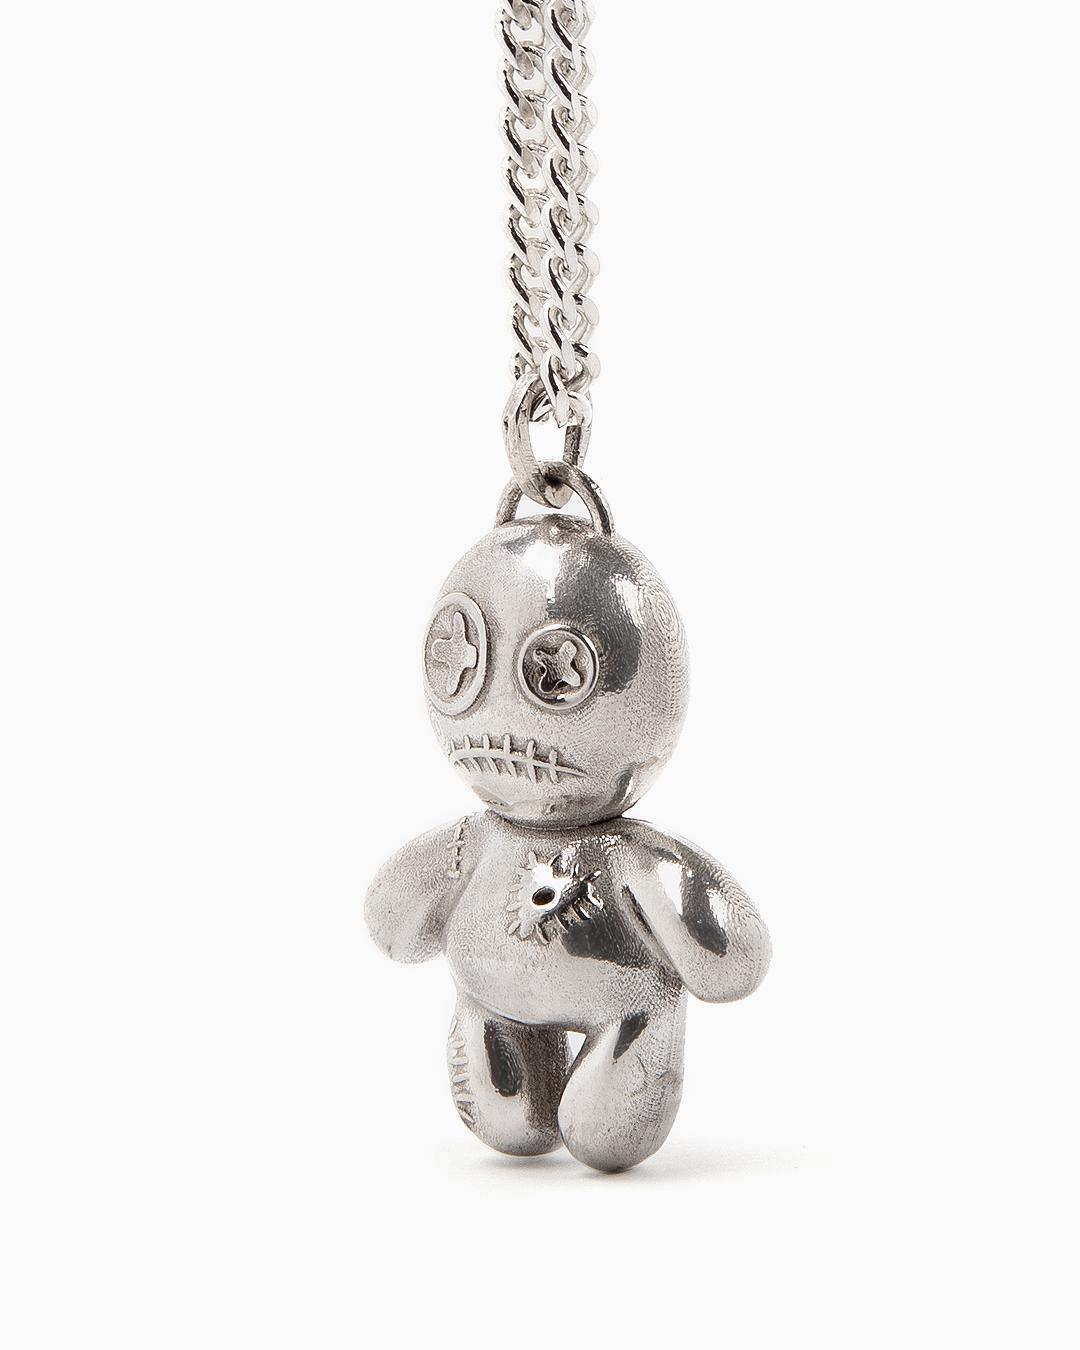 Our Voodoo doll is a one-of-a-kind accessory where cuteness meets creepy.

It consists of a 45 cm curb chain and the pendant has a length of 3 cm.

Heavyweight. 

You can choose between Sterling Silver or Vermeil.

This unique piece is handcrafted